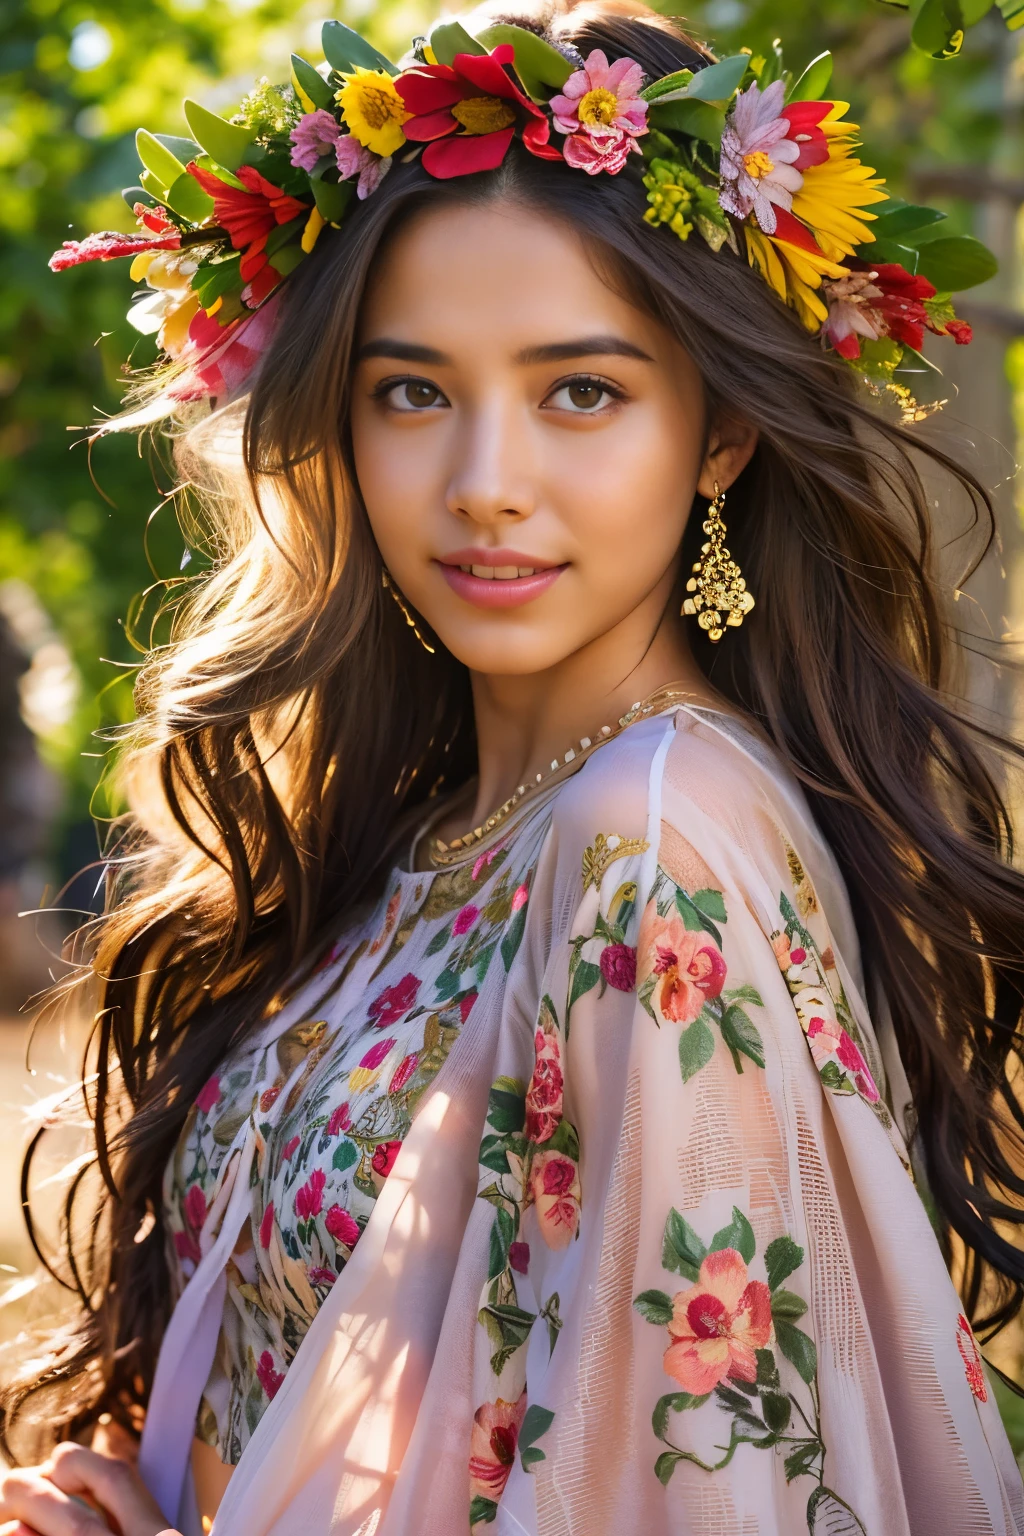 (best quality,realistic:1.2),beautiful Spanish girl,detailed eyes,luscious lips,flowing brunette hair,warm sunlight,captivating smile,vibrant colors,traditional Spanish dress,flower crown,garden background,floral elements,rich texture,portrait style,soft and natural lighting, (NSFW:1.3)